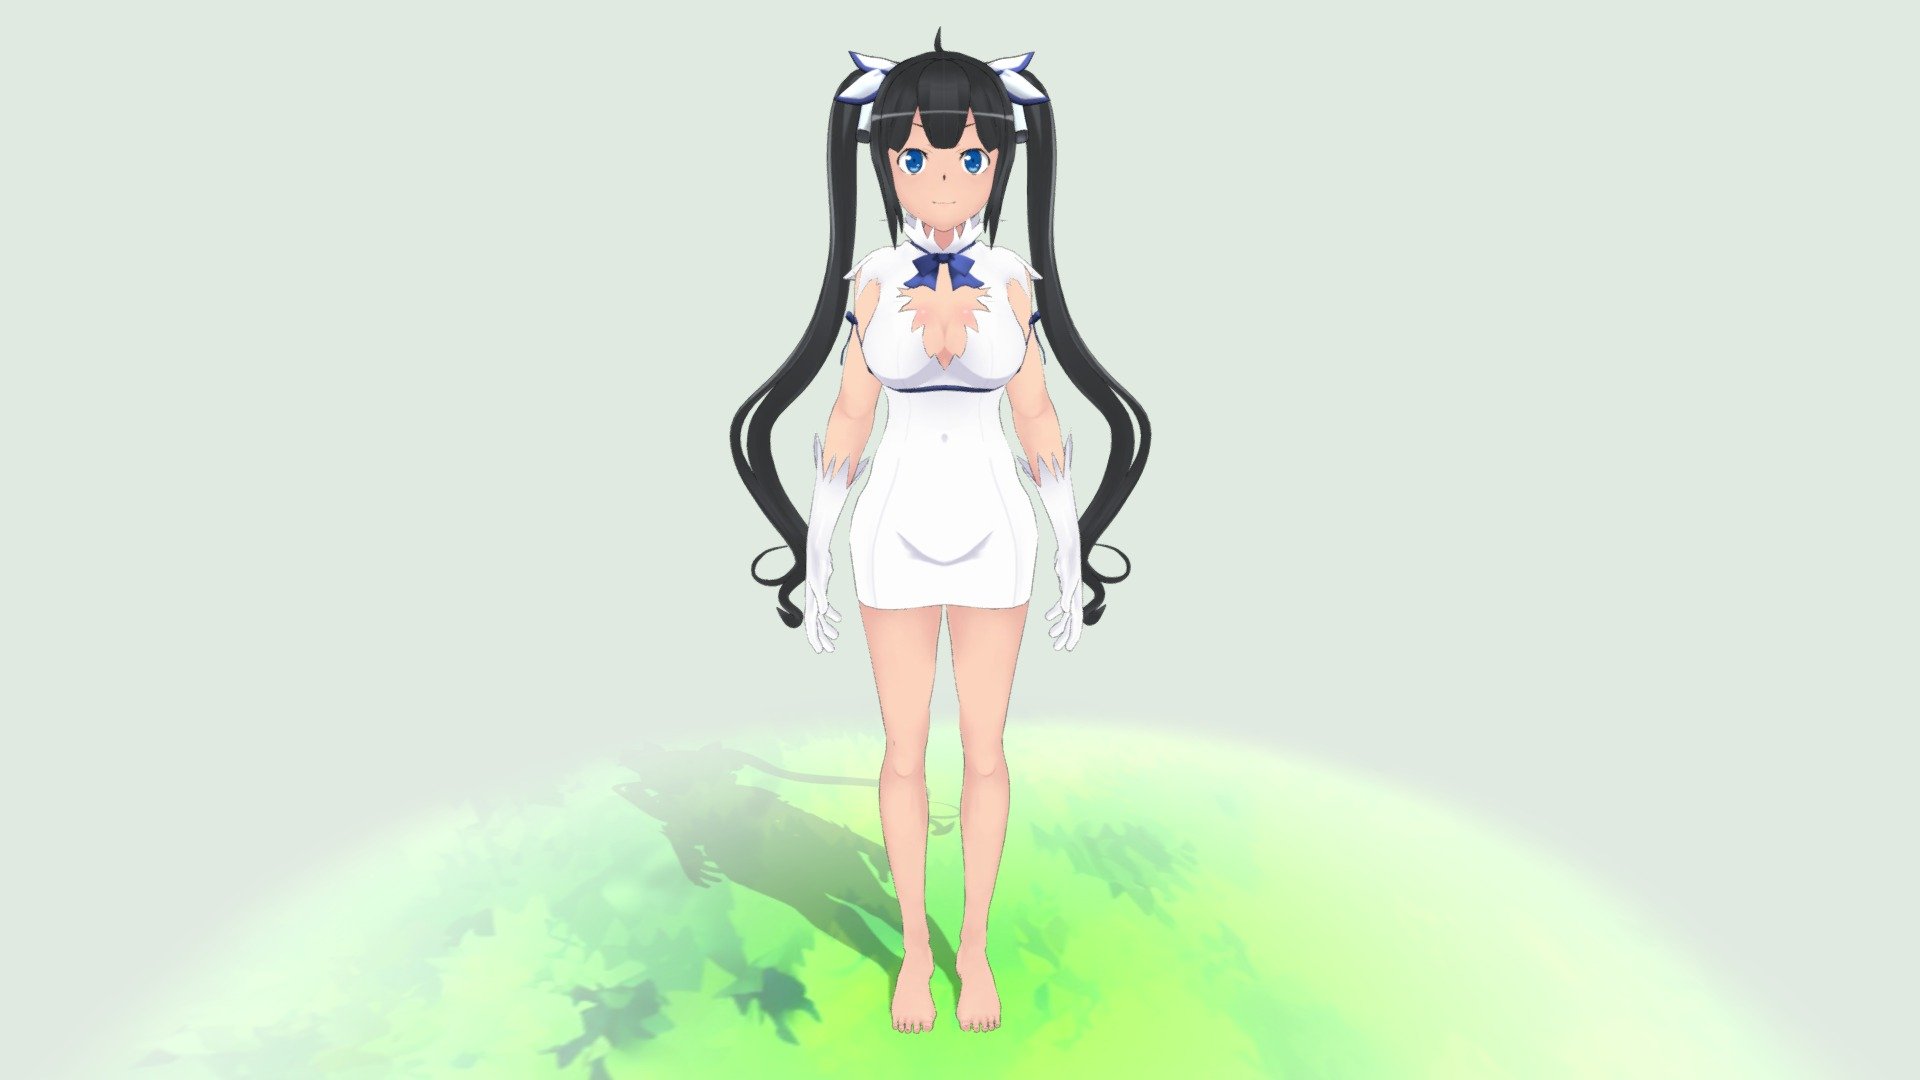 Hestia the goddess from danmachi serie !

This time the model is free.

I try to make animation this time but i have some trouble with shapekey animations, that's why it has no expression.
i ll still have much a learn:)

Made with Blender 3.1 - DanMachi- ダンまち - Hestia - Download Free 3D model by Kaijin (@Kaijin13) 3d model